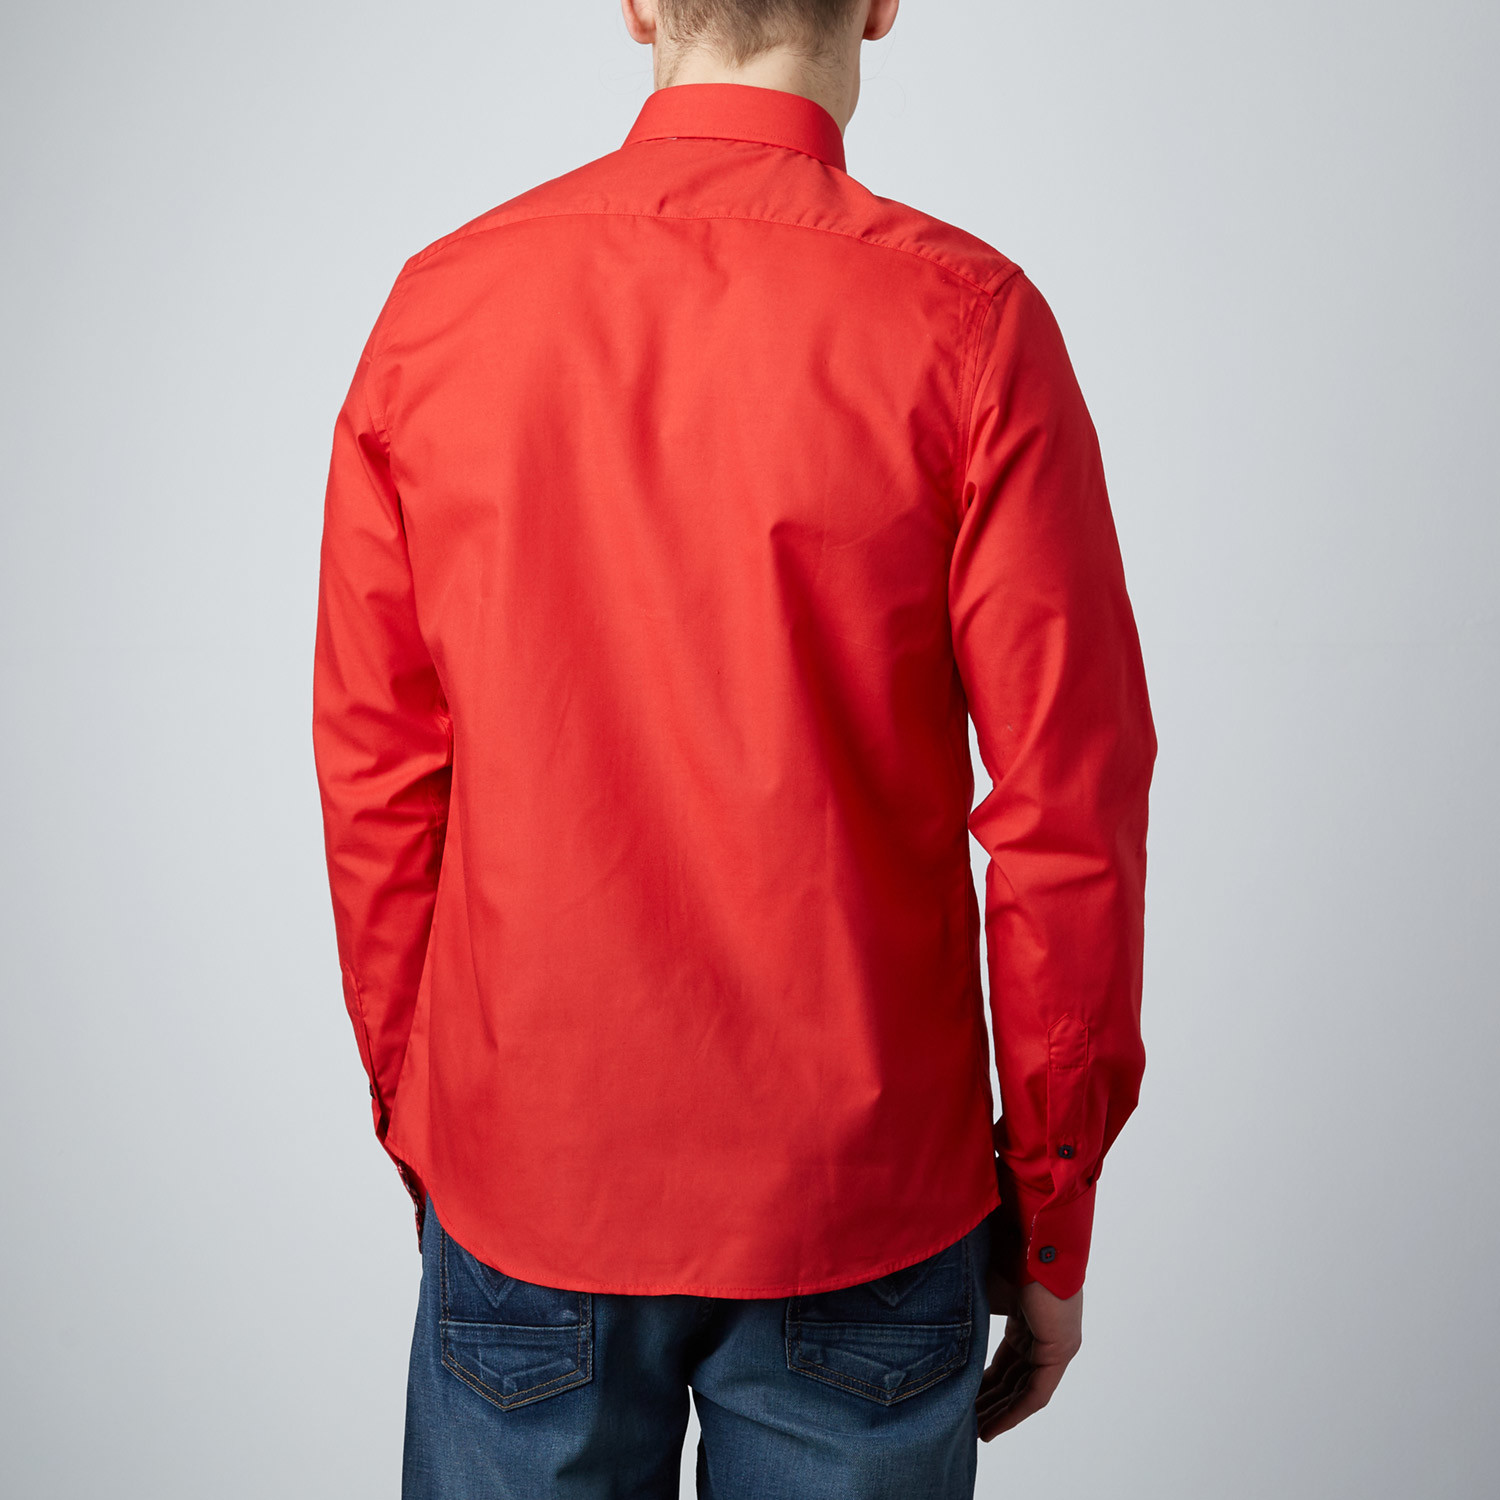 Classic Button-Up Dress Shirt // Red (S) - Rosso Milano - Touch of Modern